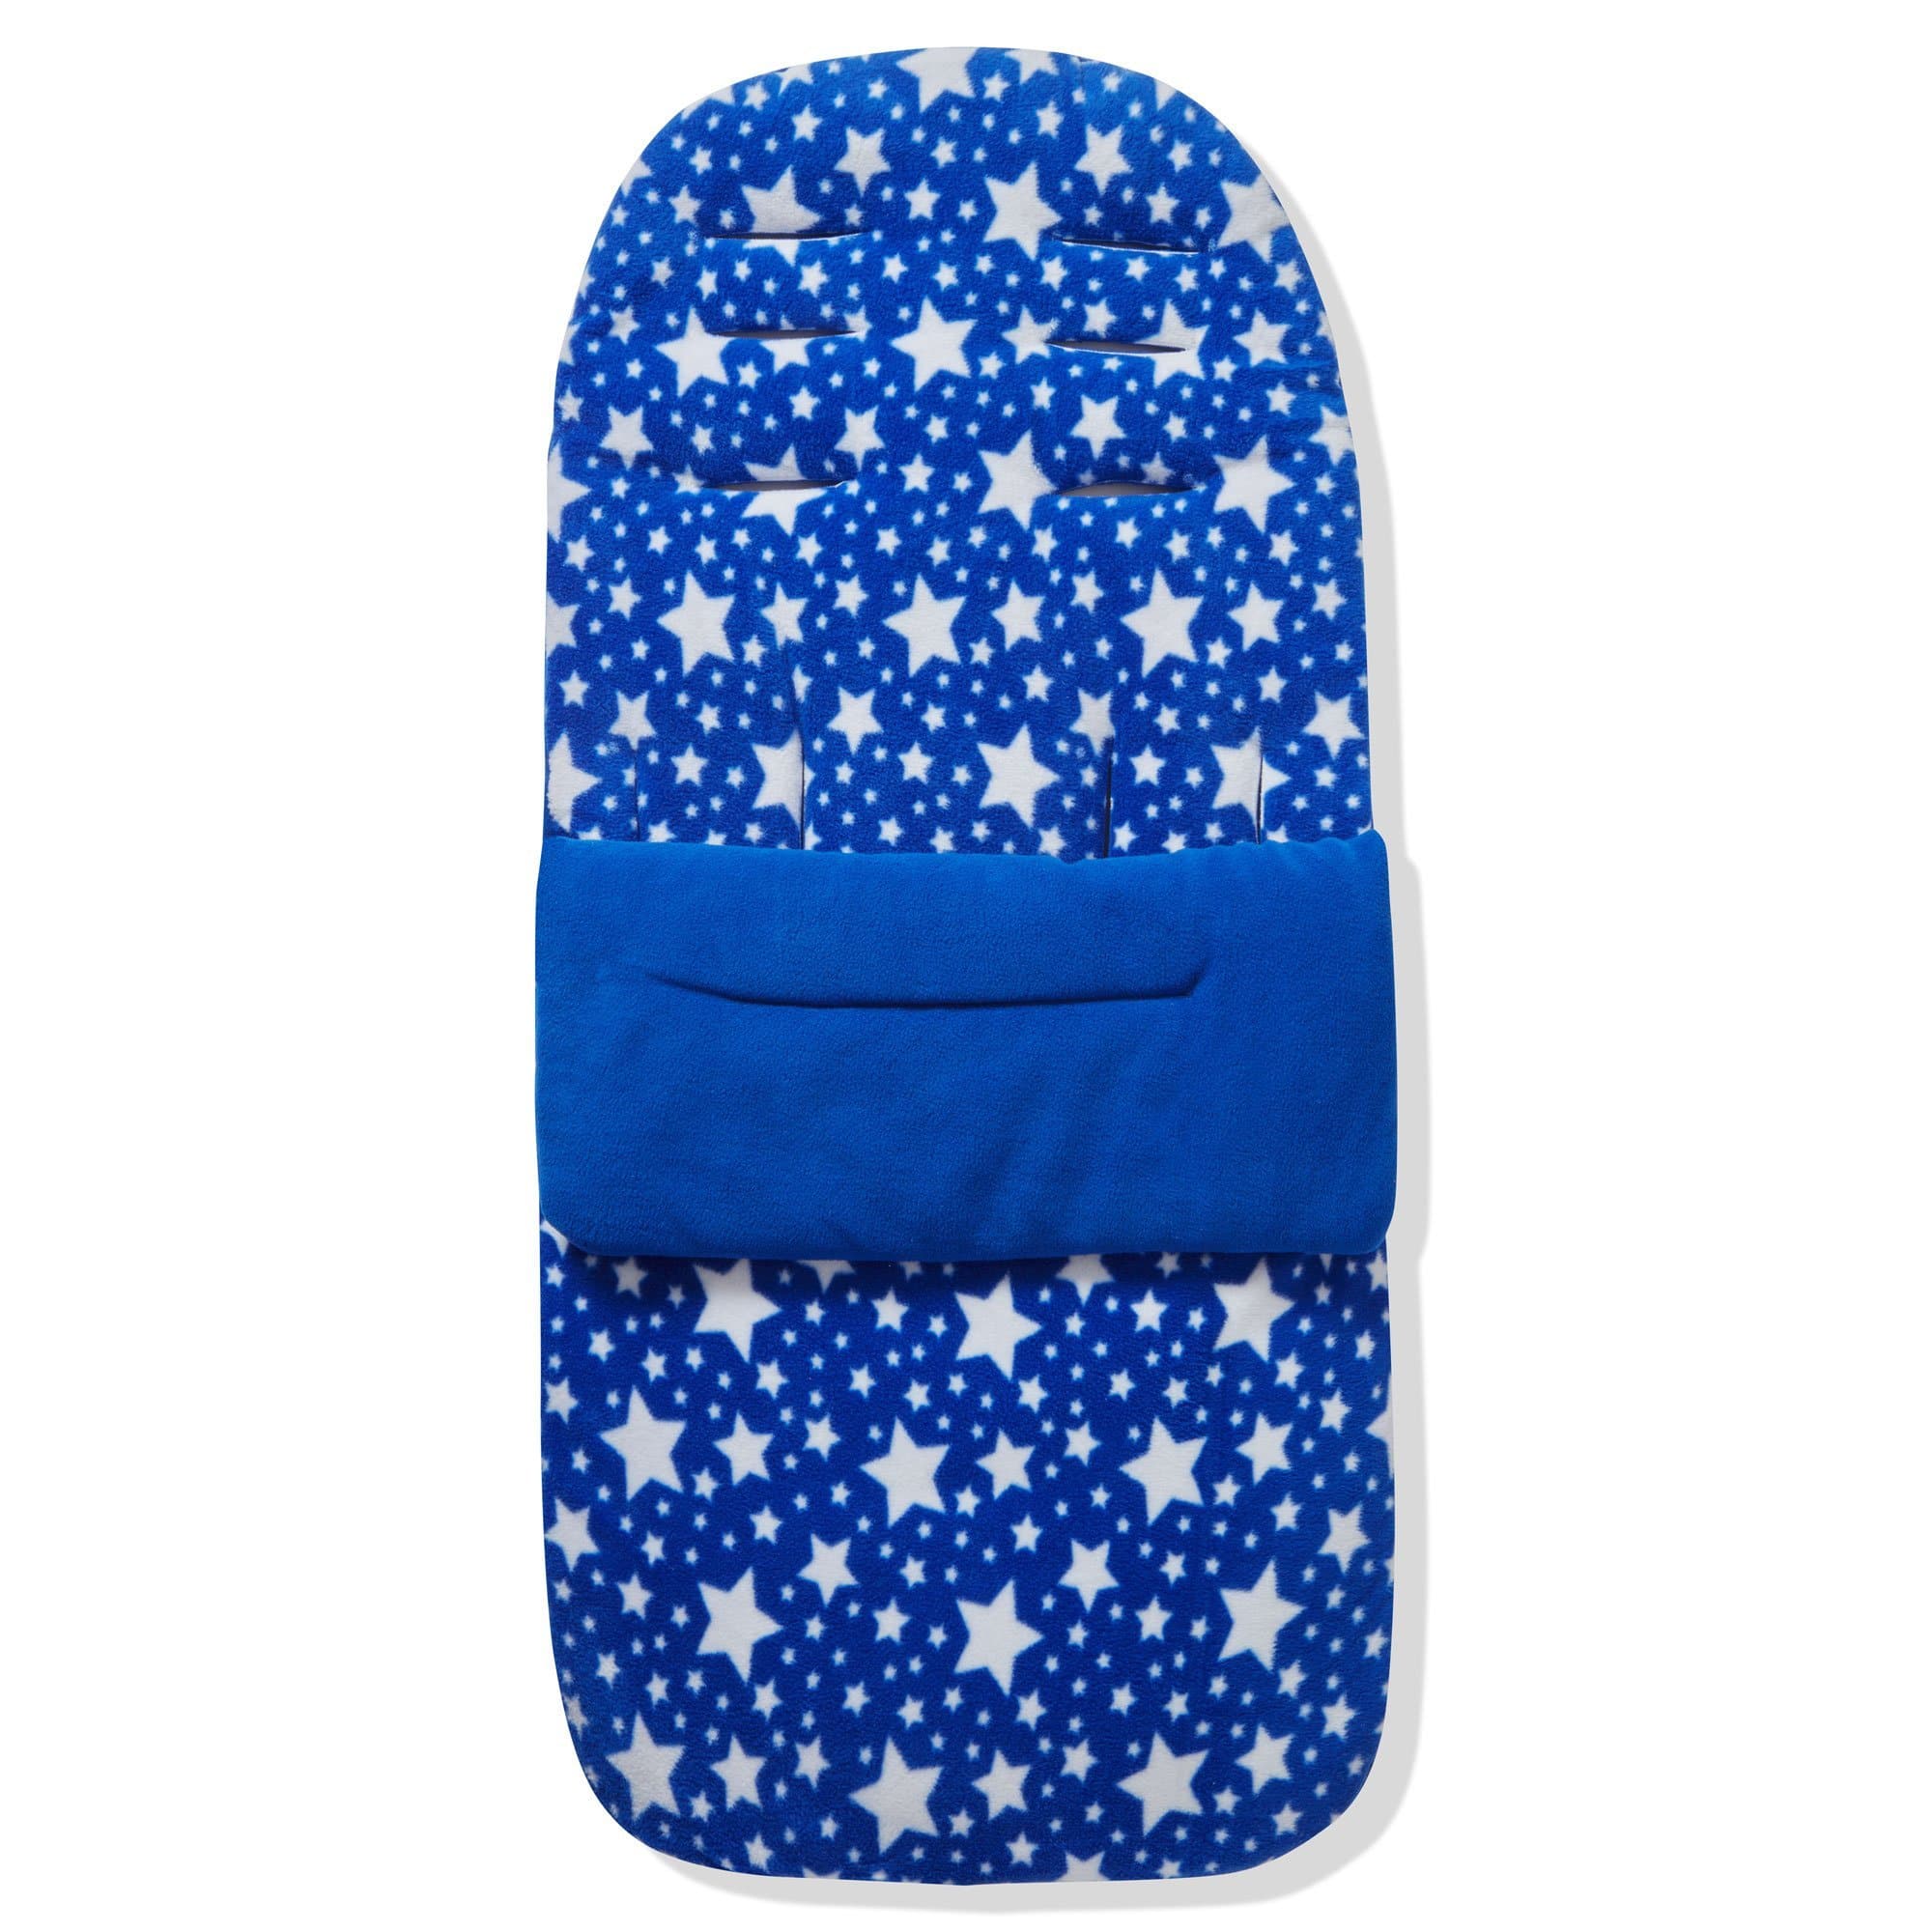 Fleece Footmuff / Cosy Toes Compatible with Valco - Blue Star / Fits All Models | For Your Little One